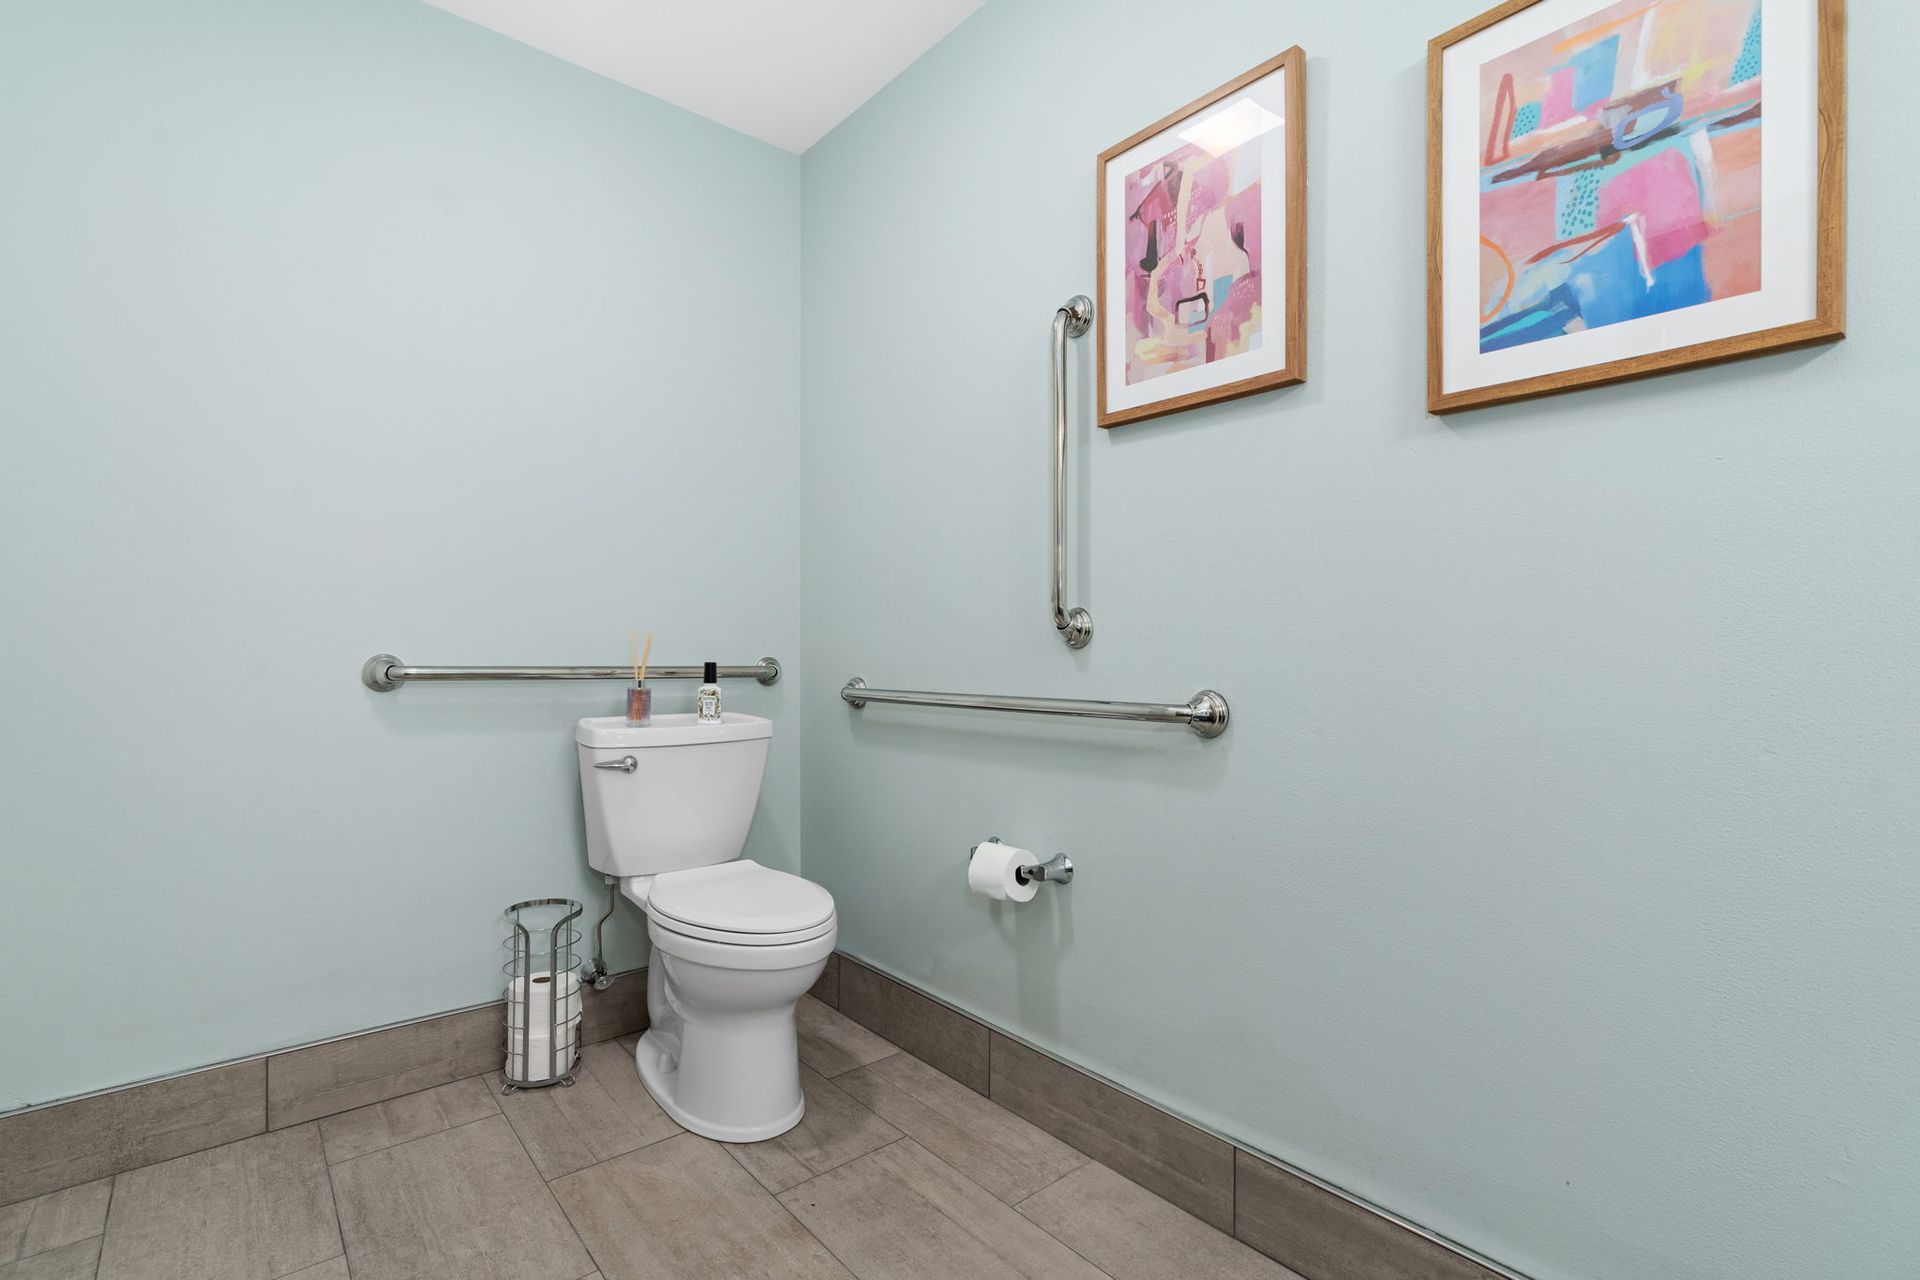 A bathroom with a toilet , handrails , and two paintings on the wall.